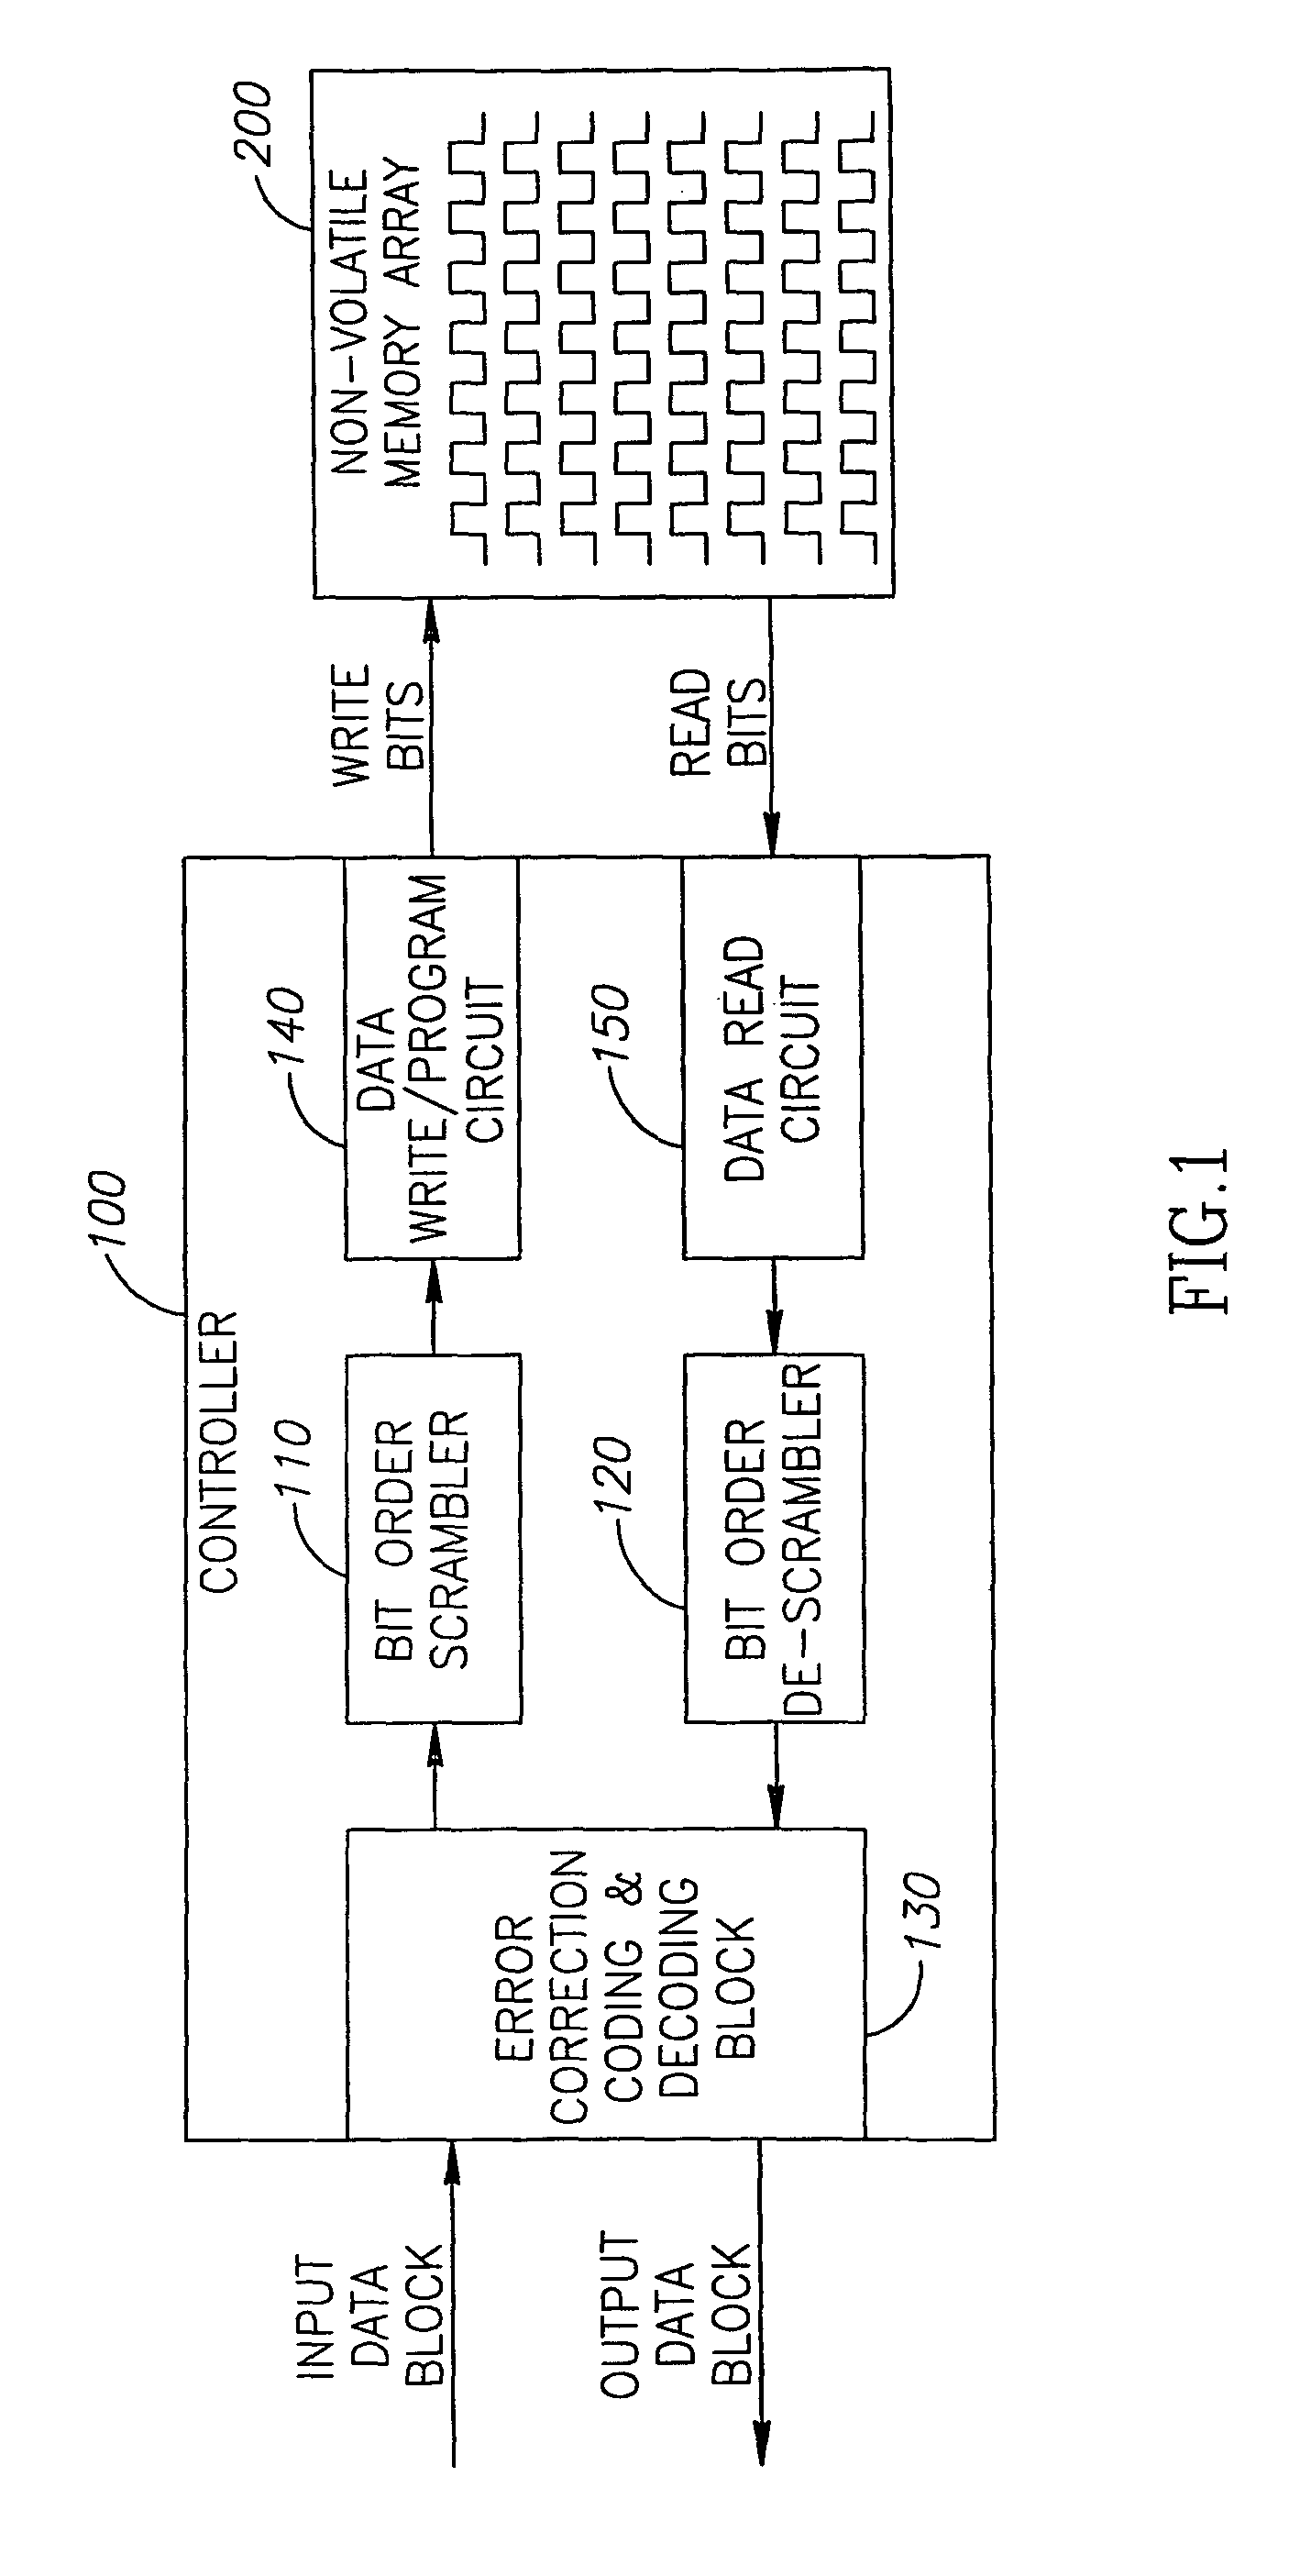 Circuit, system and method for encoding data to be stored on a non-volatile memory array